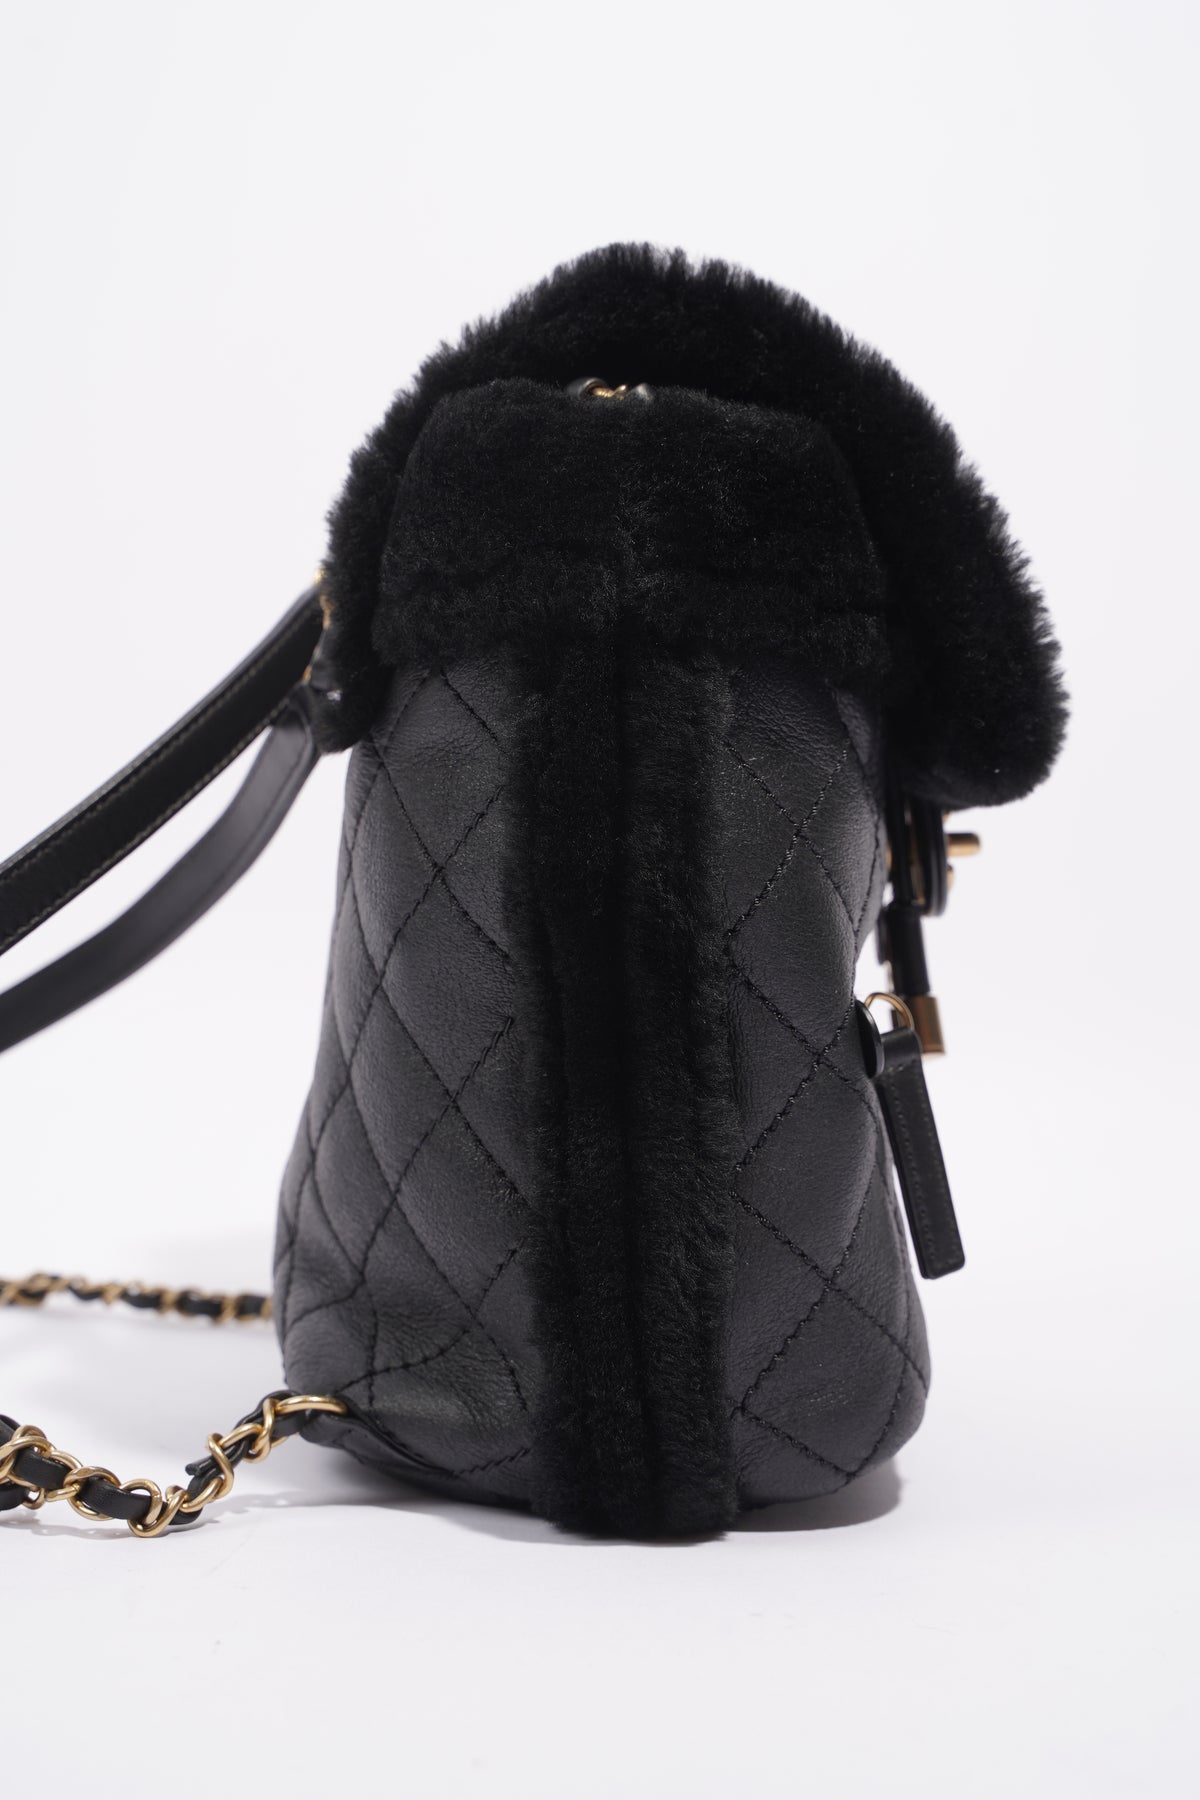 CHANEL SUEDE SHEARLING LEATHER BAG